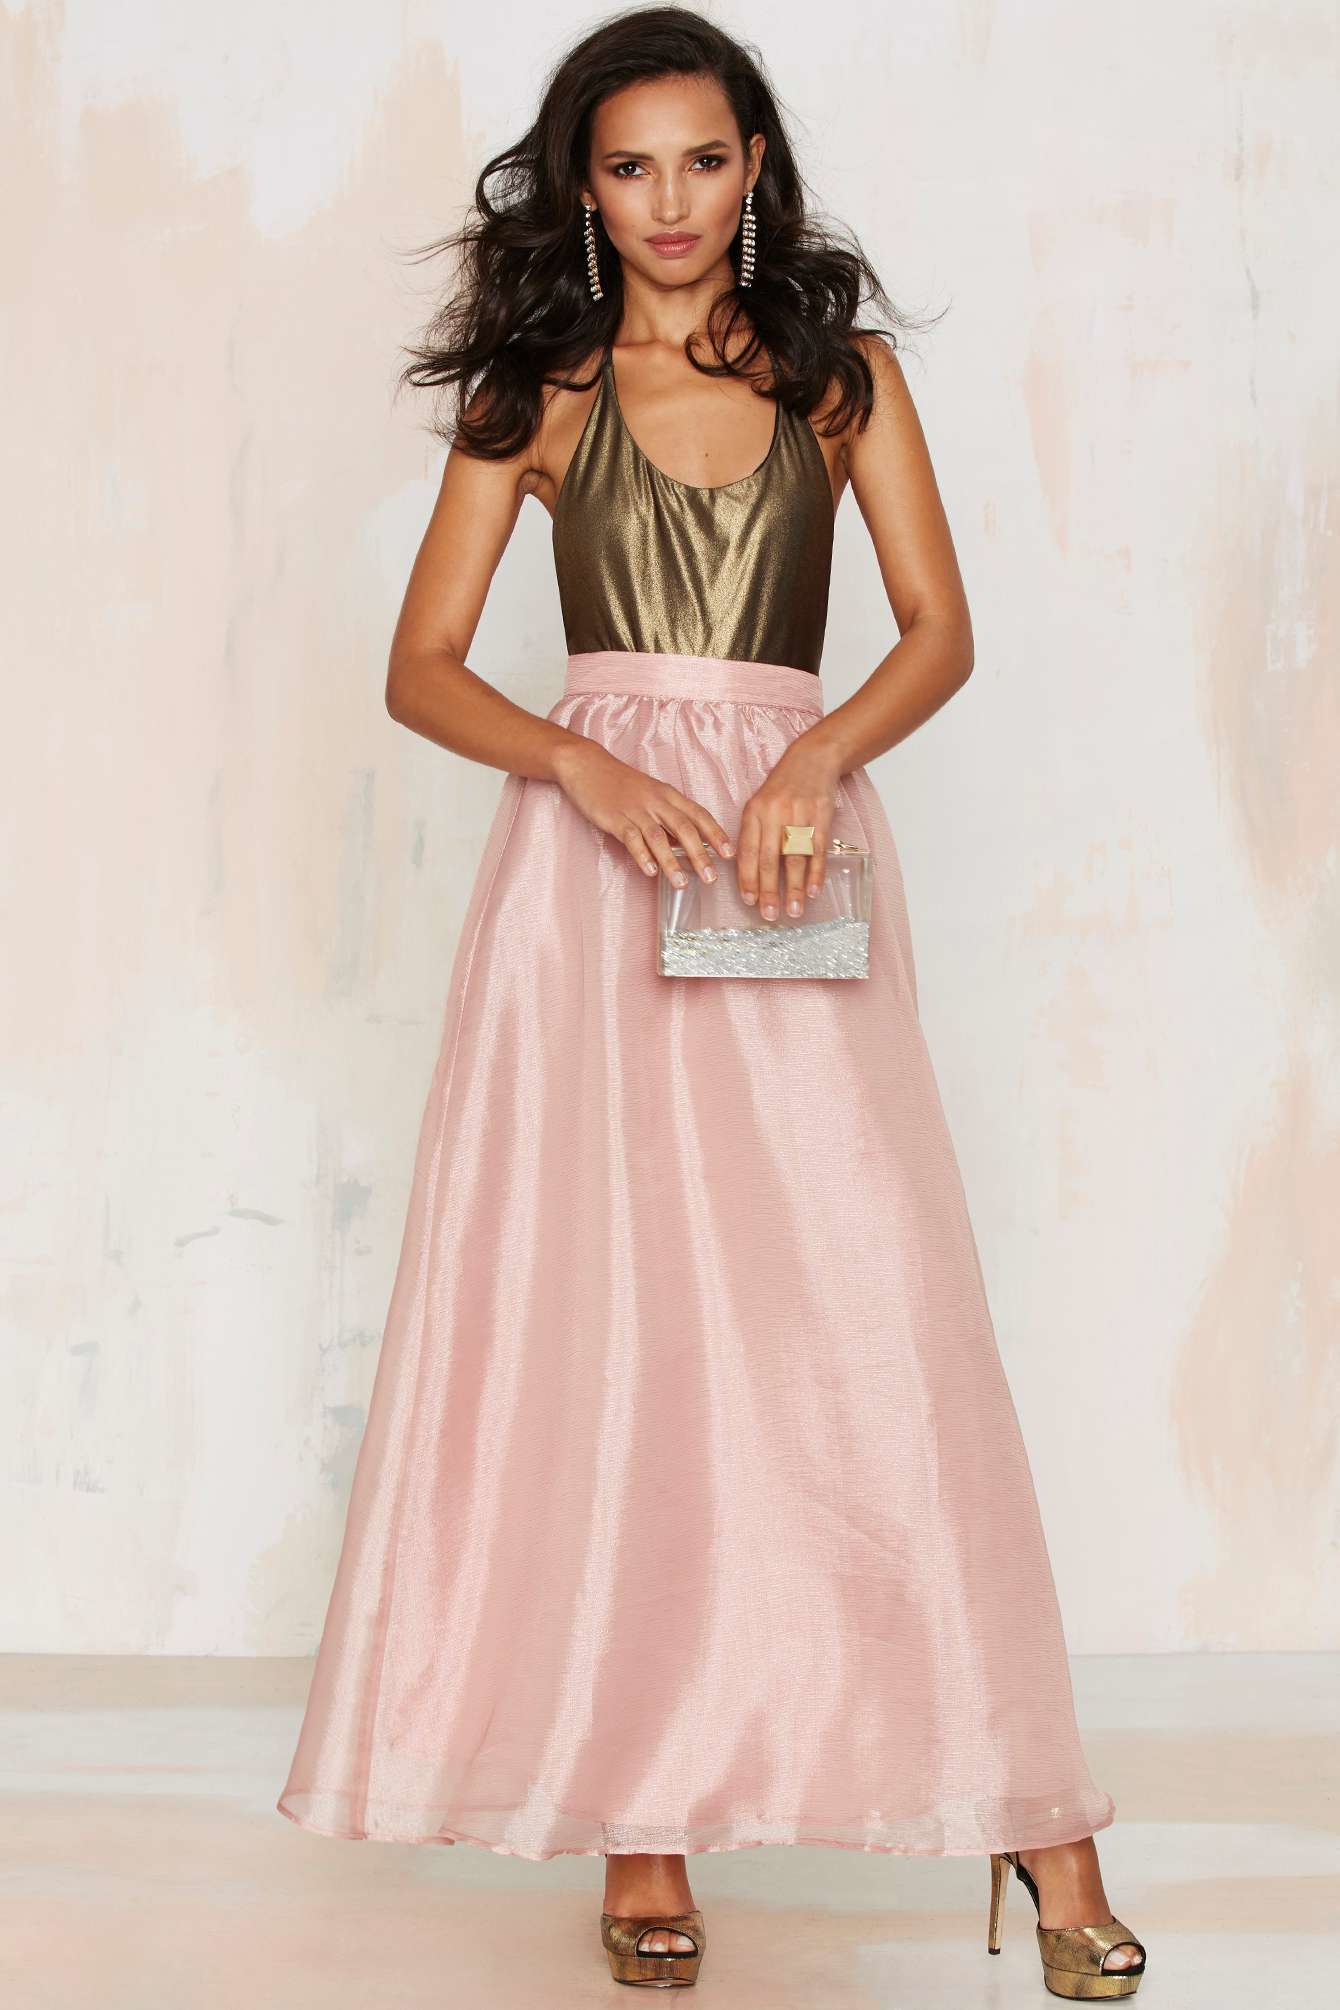 Pink Maxi Skirts Photo Album - Watch Out, There's a Clothes About